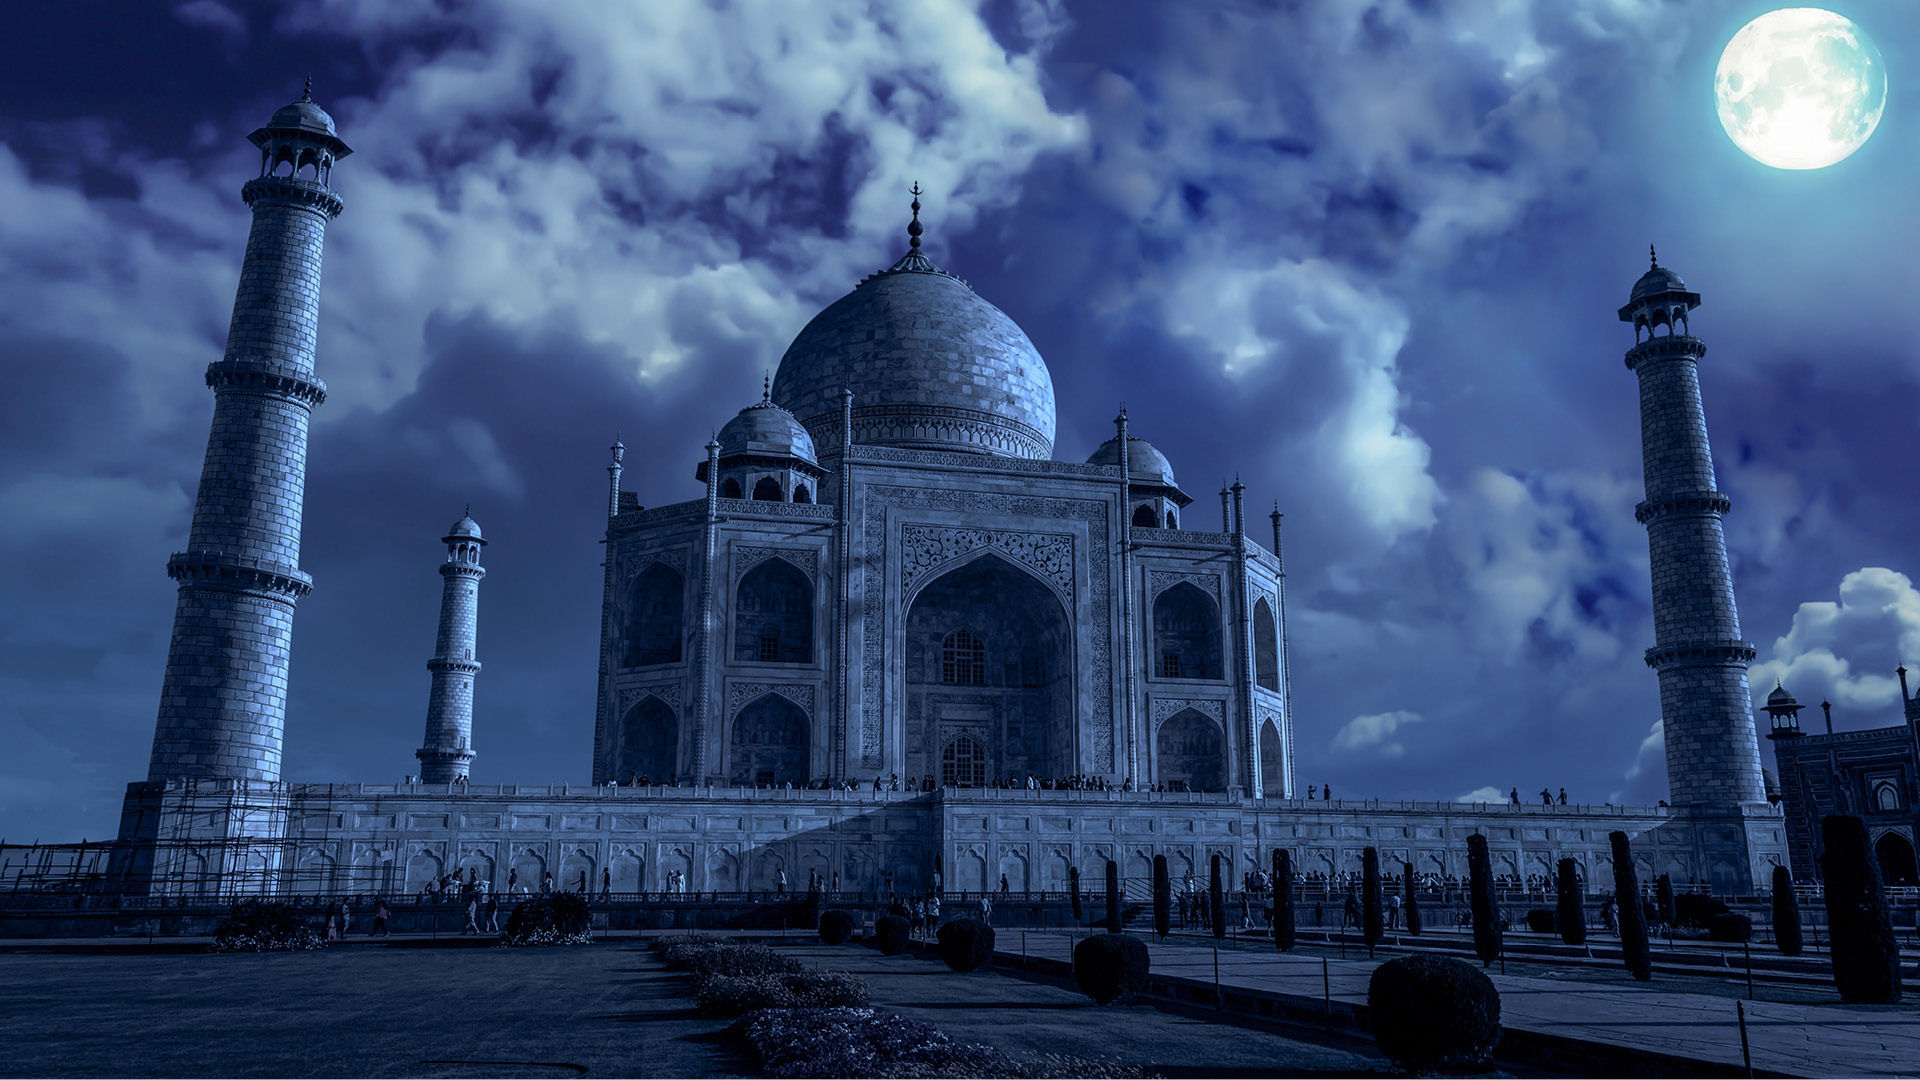 25 Beautiful Taj Mahal Photos  Most photographed building in the world